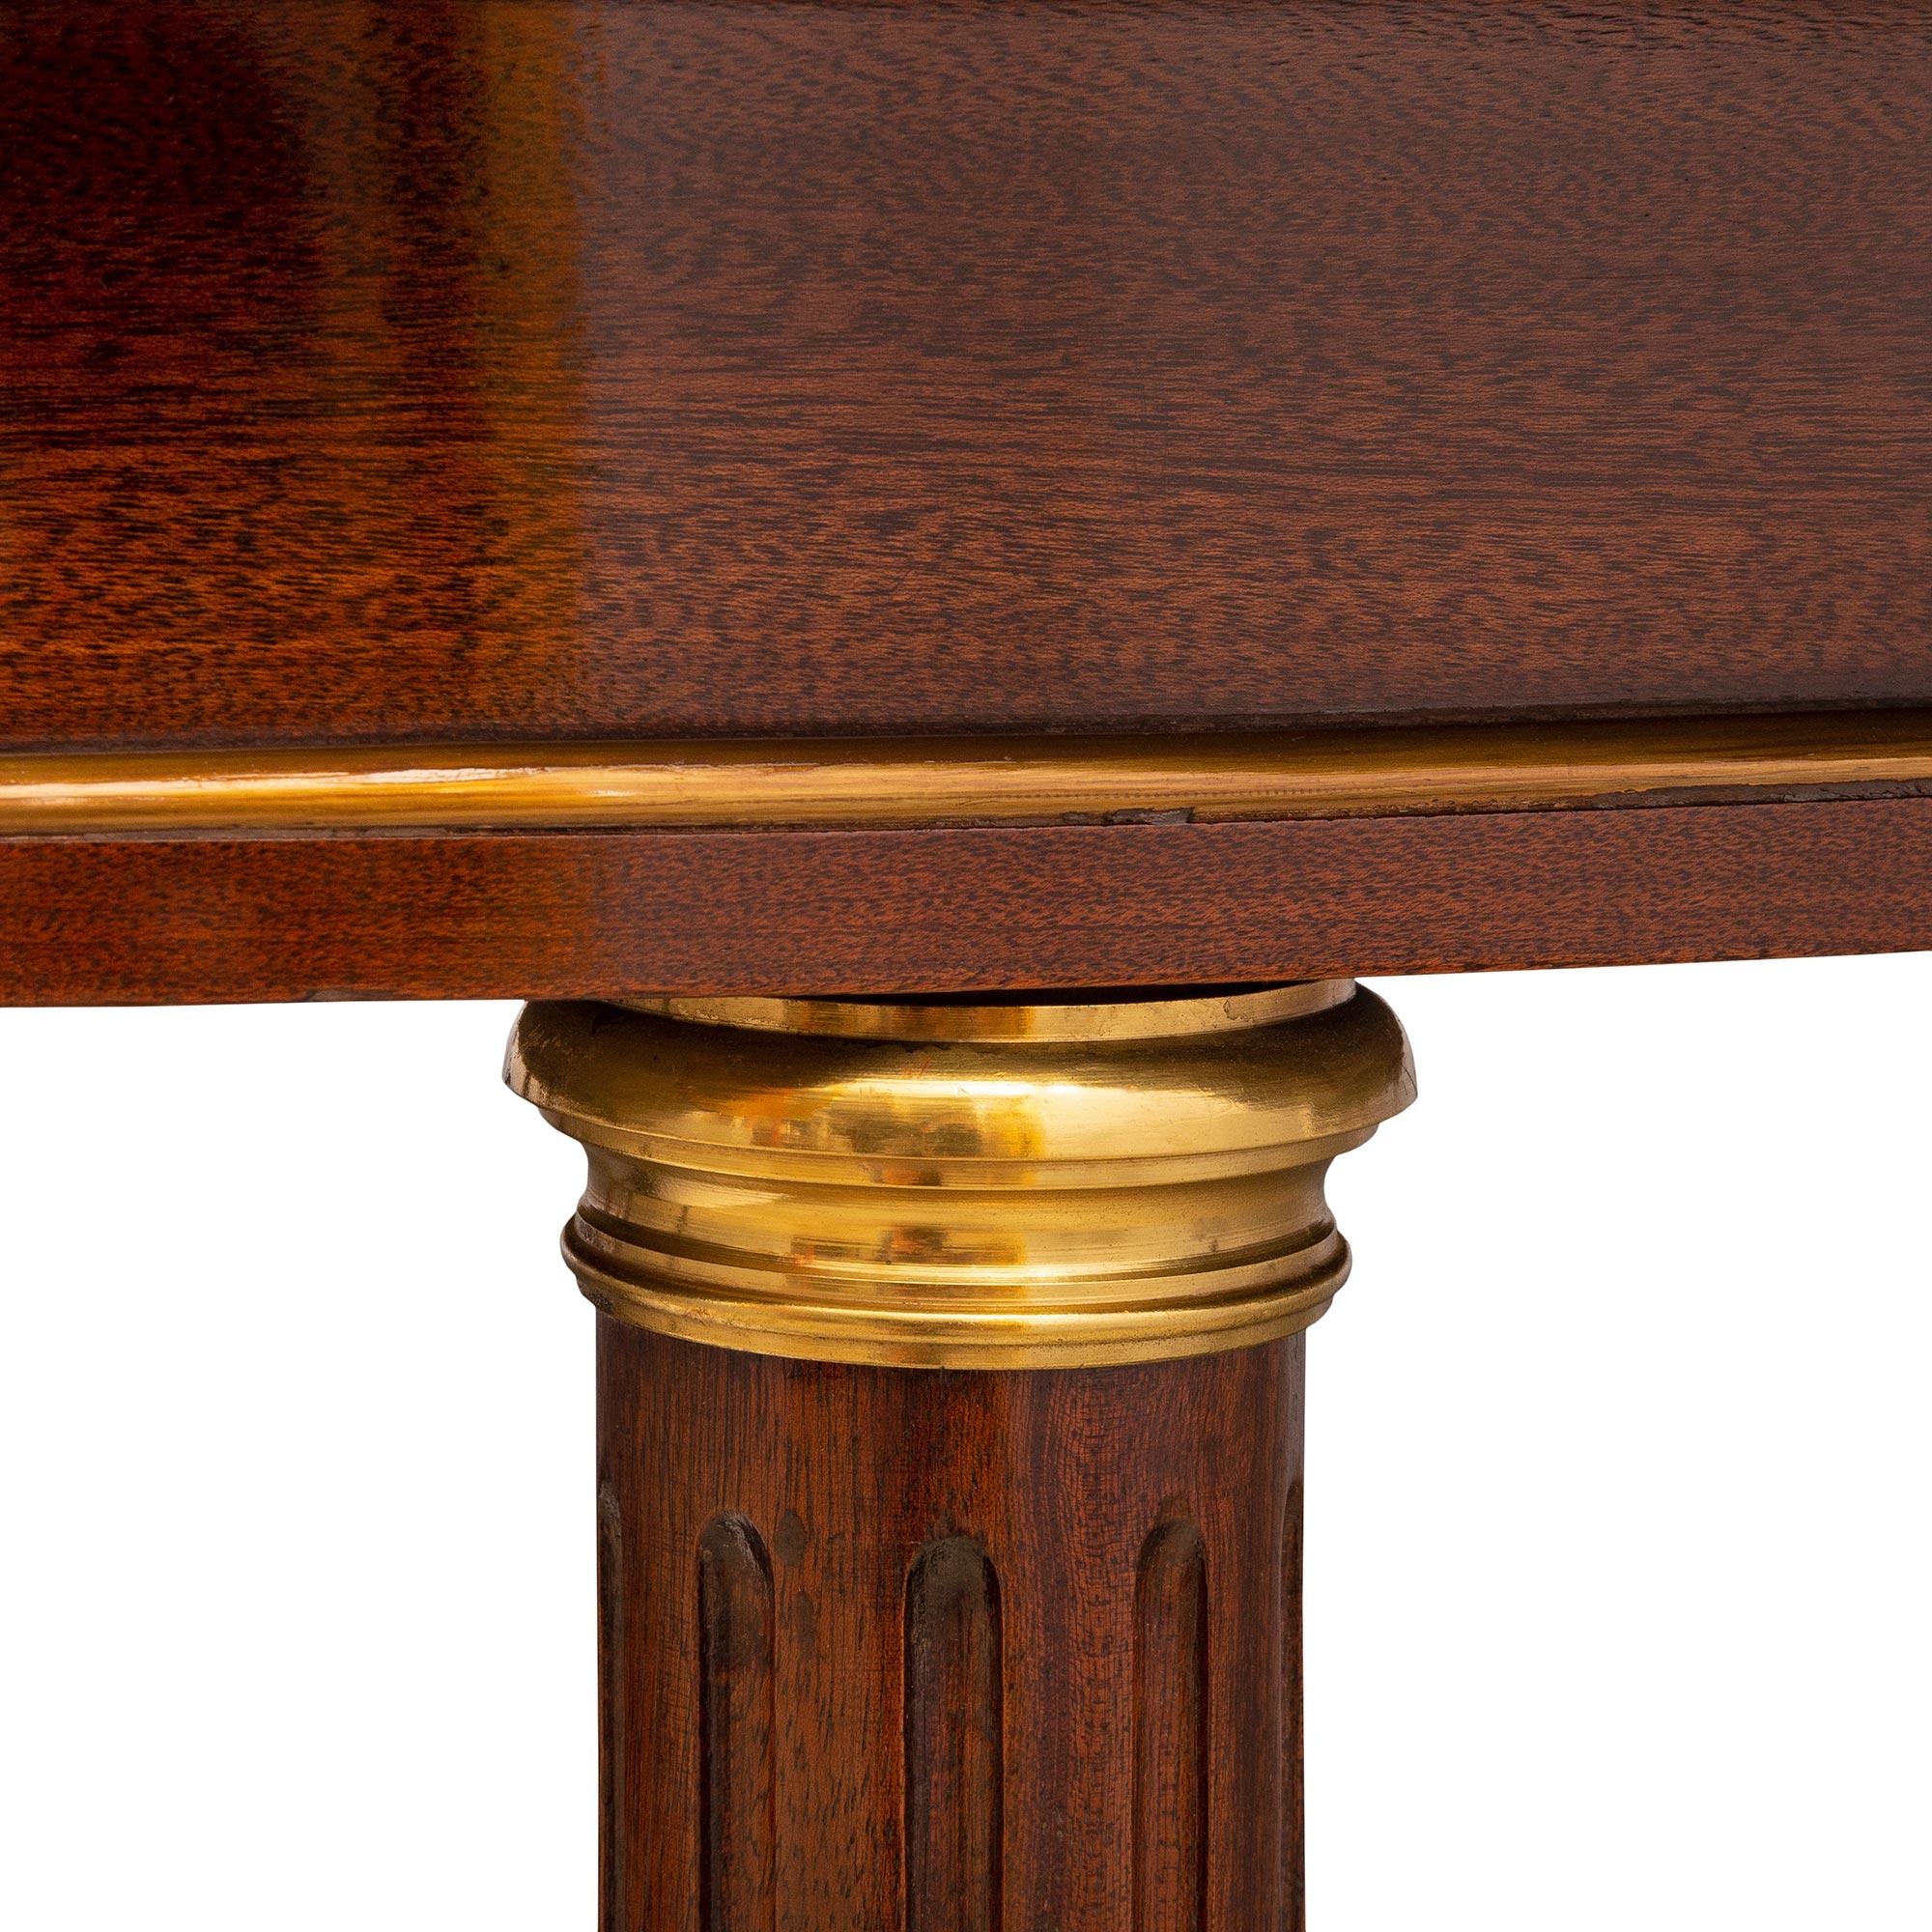 French Turn of the Century Empire St. Flamed Mahogany and Ormolu Dining Table For Sale 6